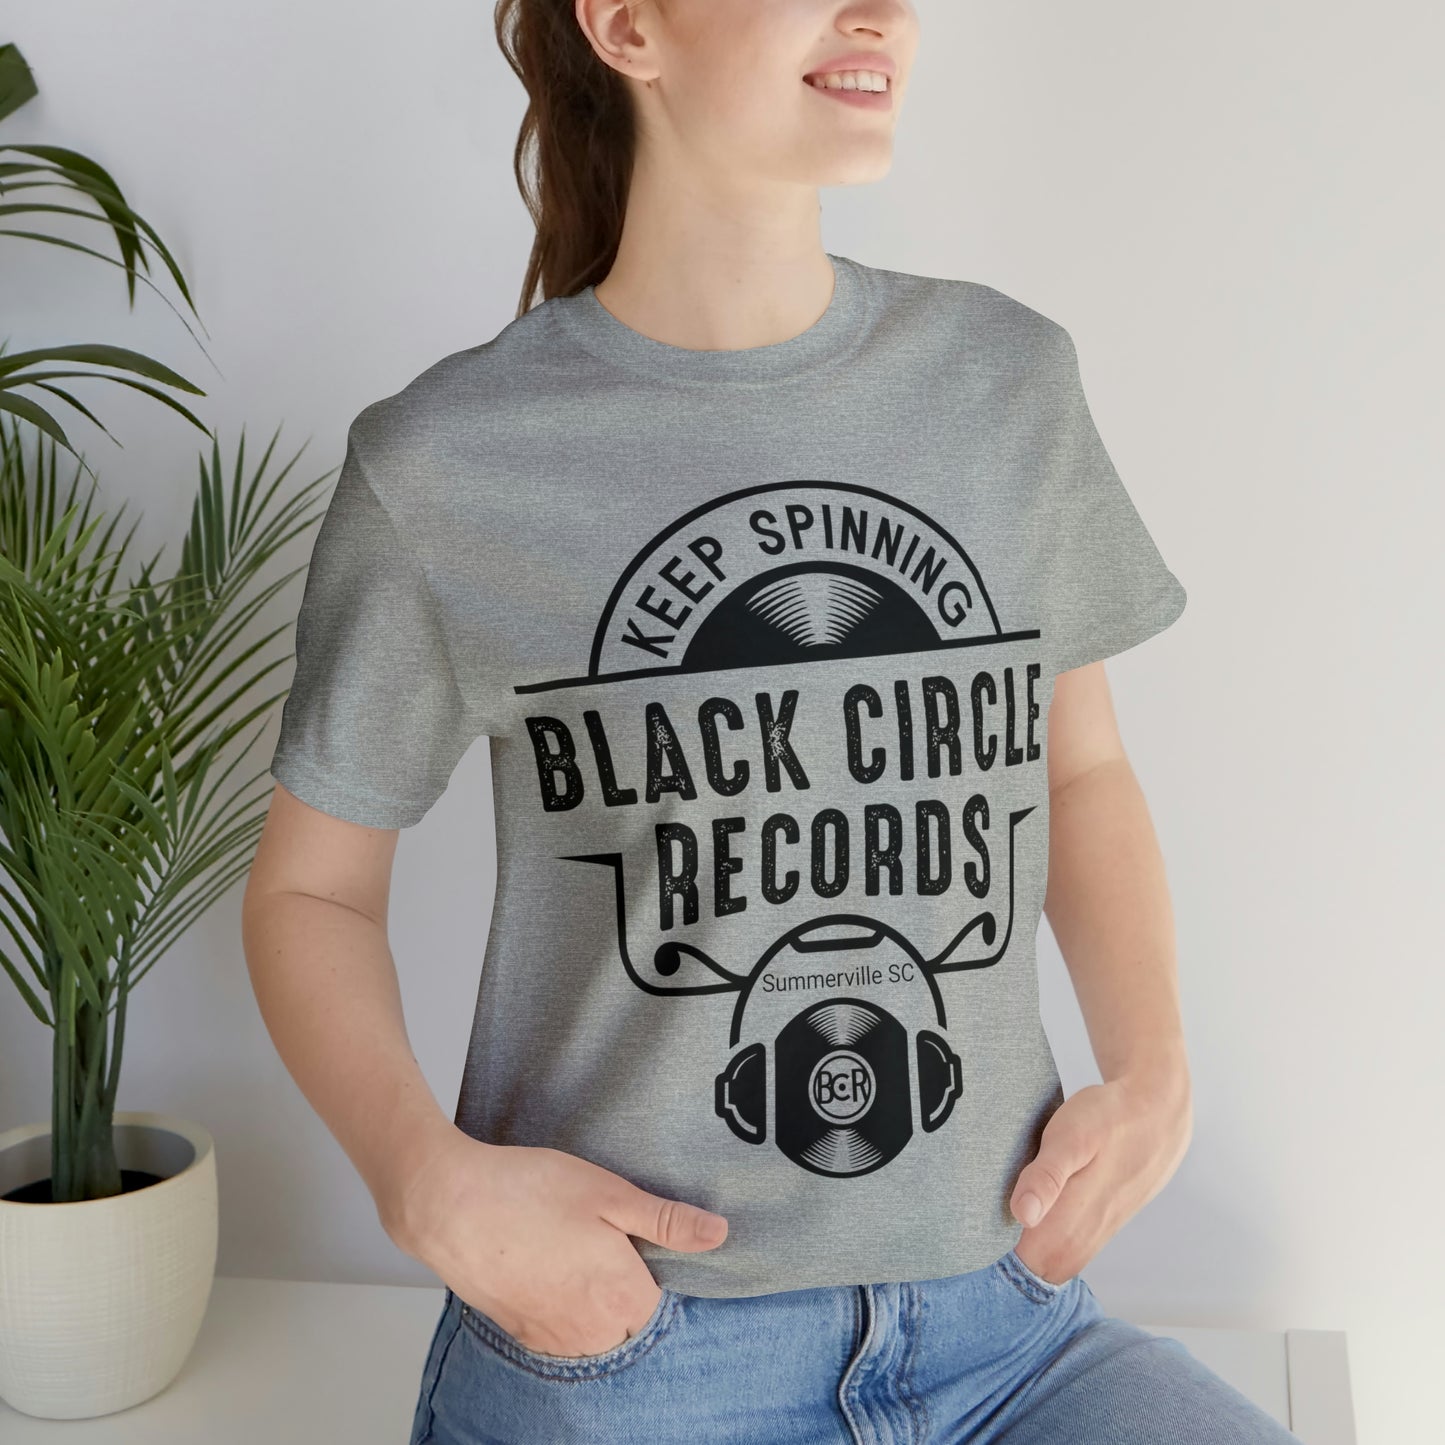 Black Circle Records - Record Store T-Shirt Keep Spinning Vinyl Collection